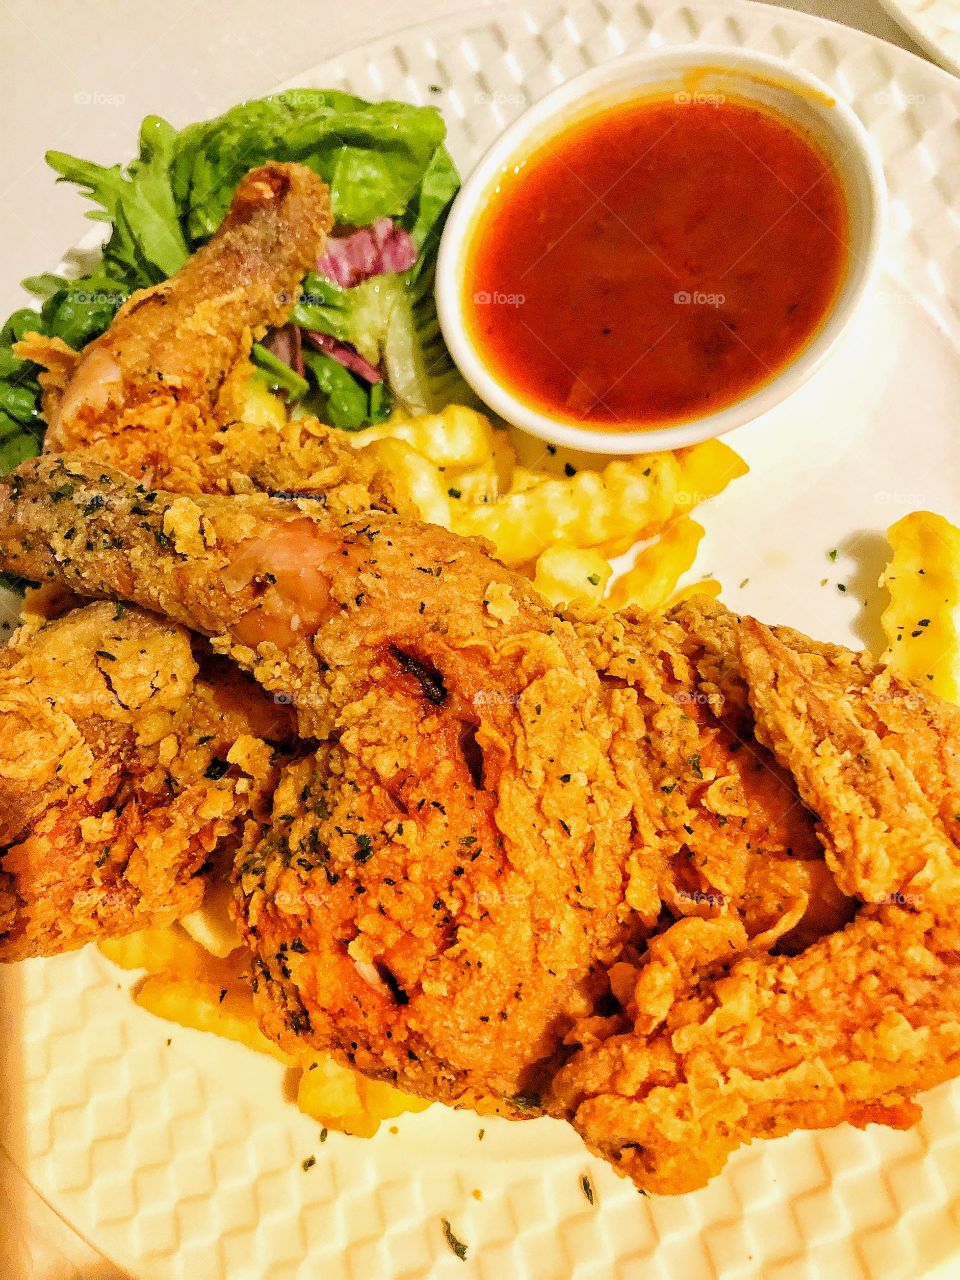 Fried chicken in Malaysia 